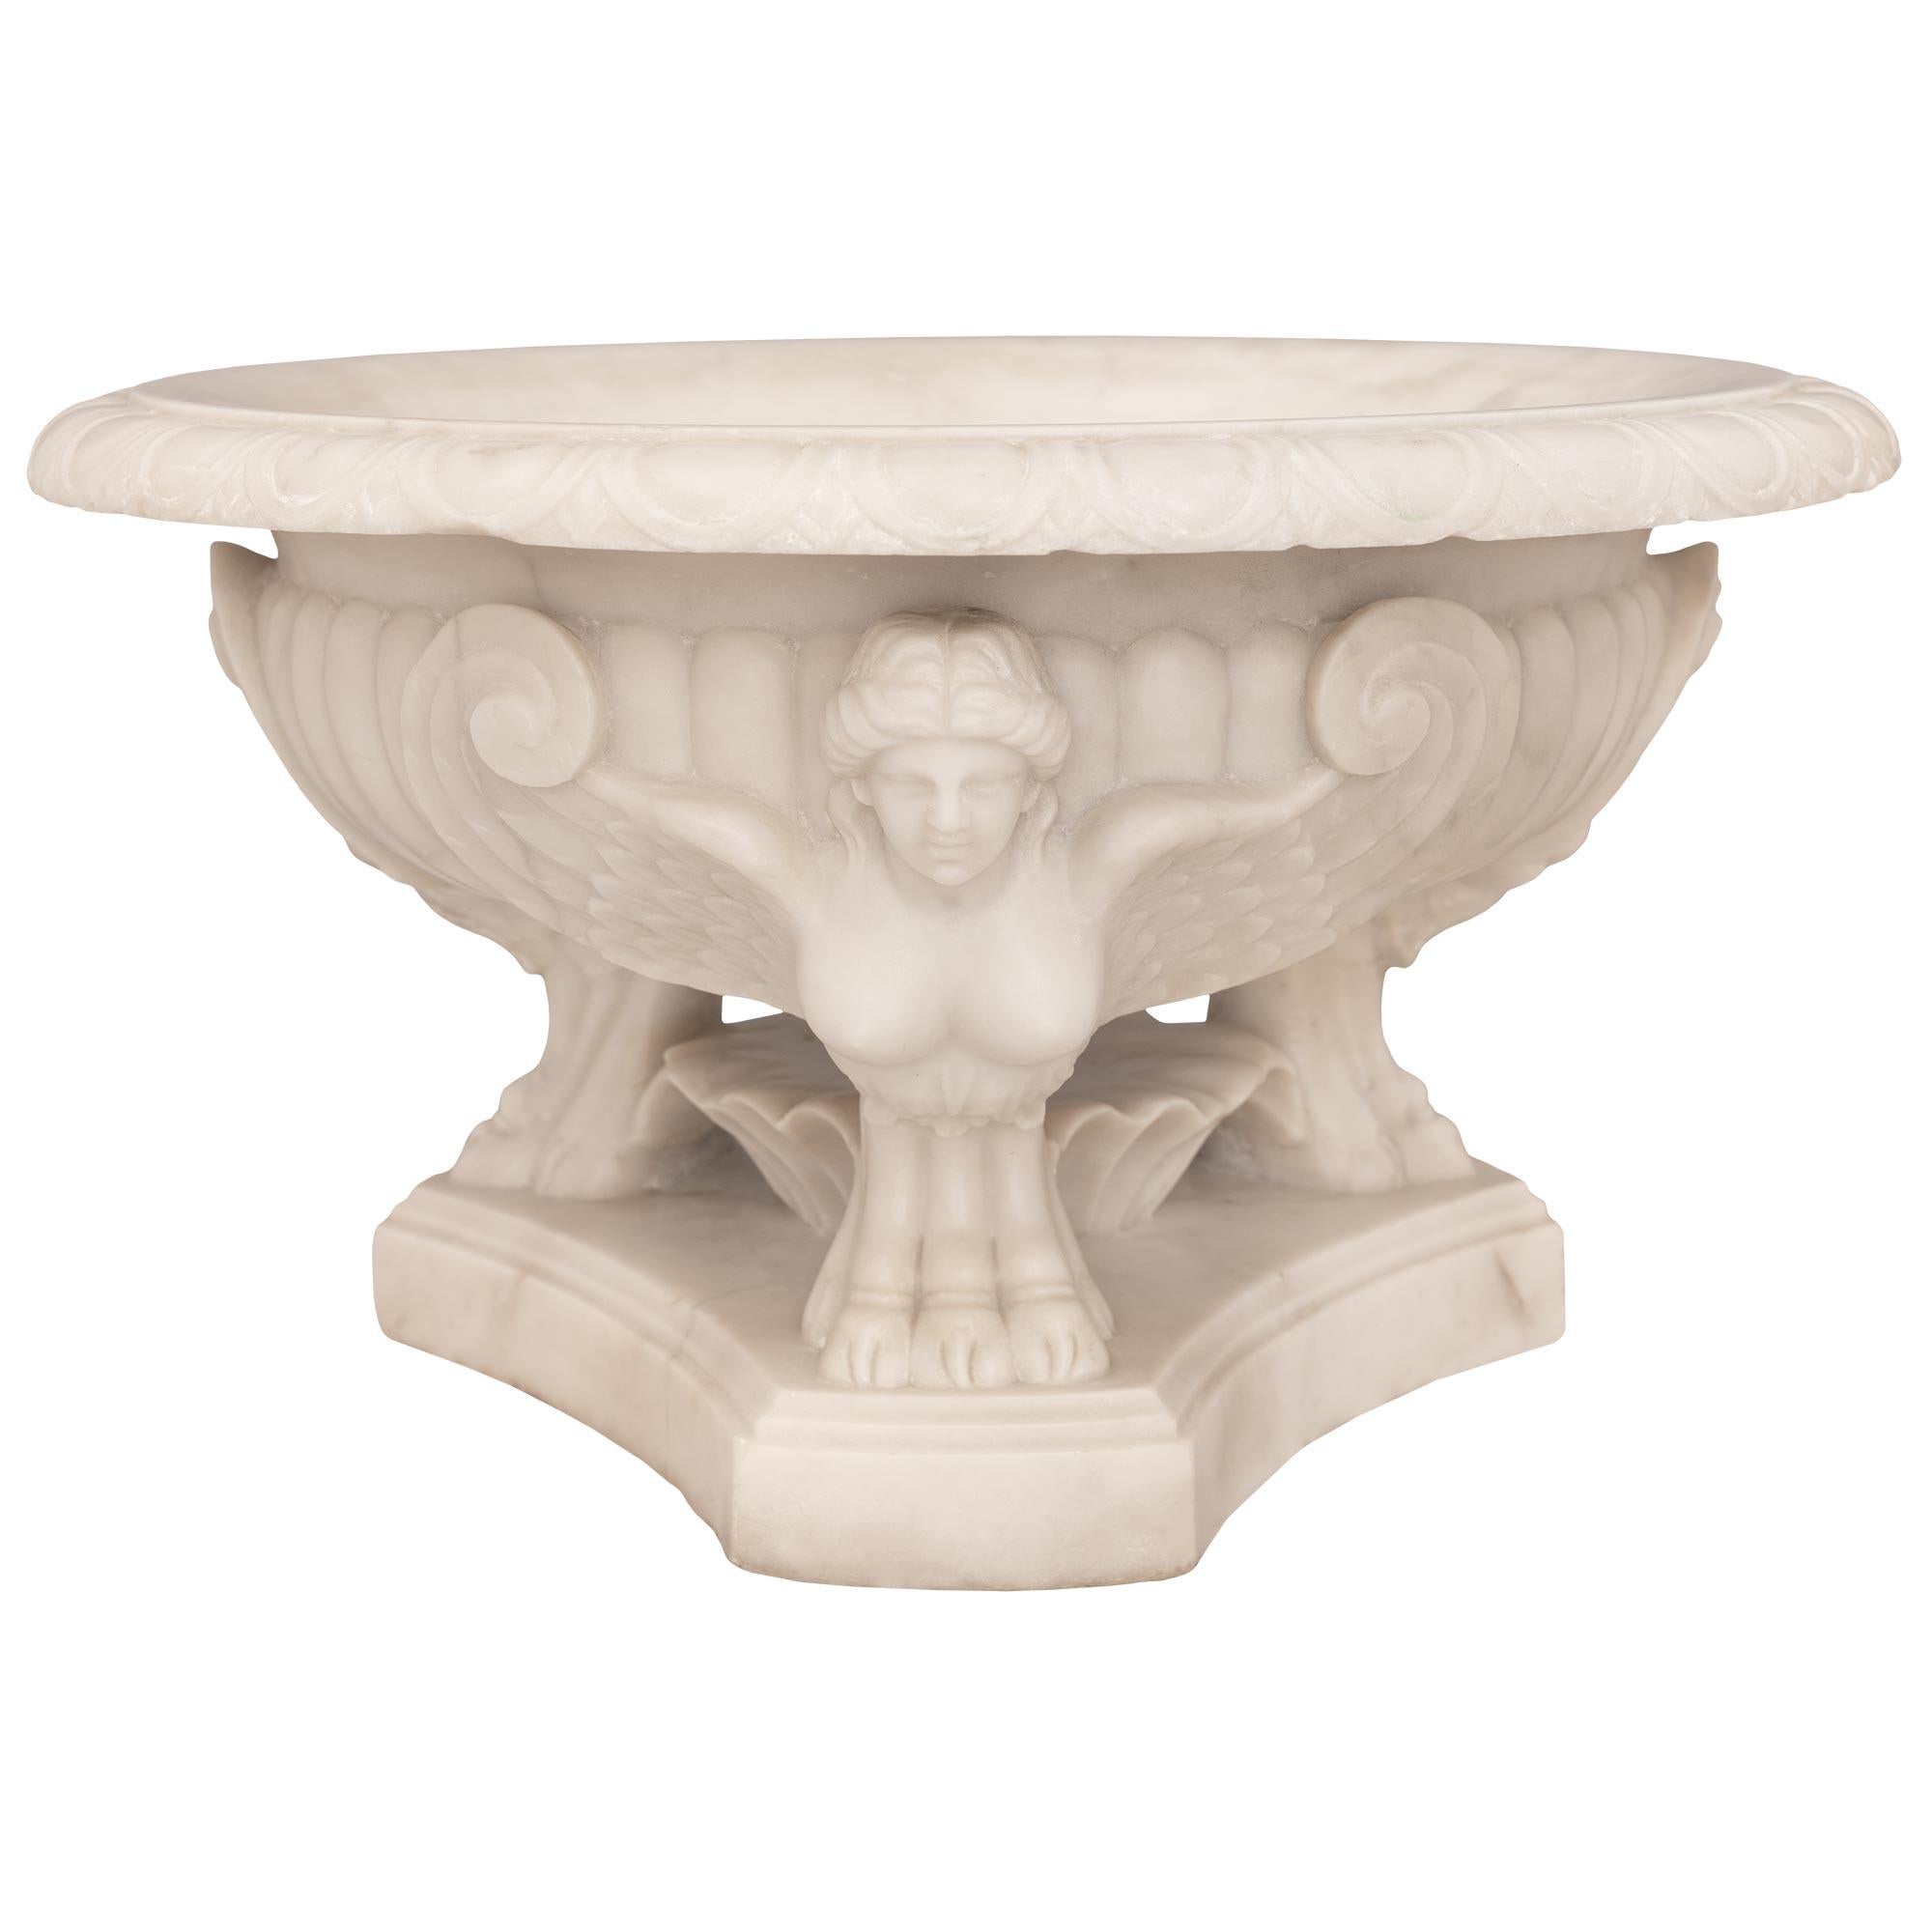 Italian 19th Century Neo-Classical St. White Carrara Marble Centerpiece Bowl For Sale 4